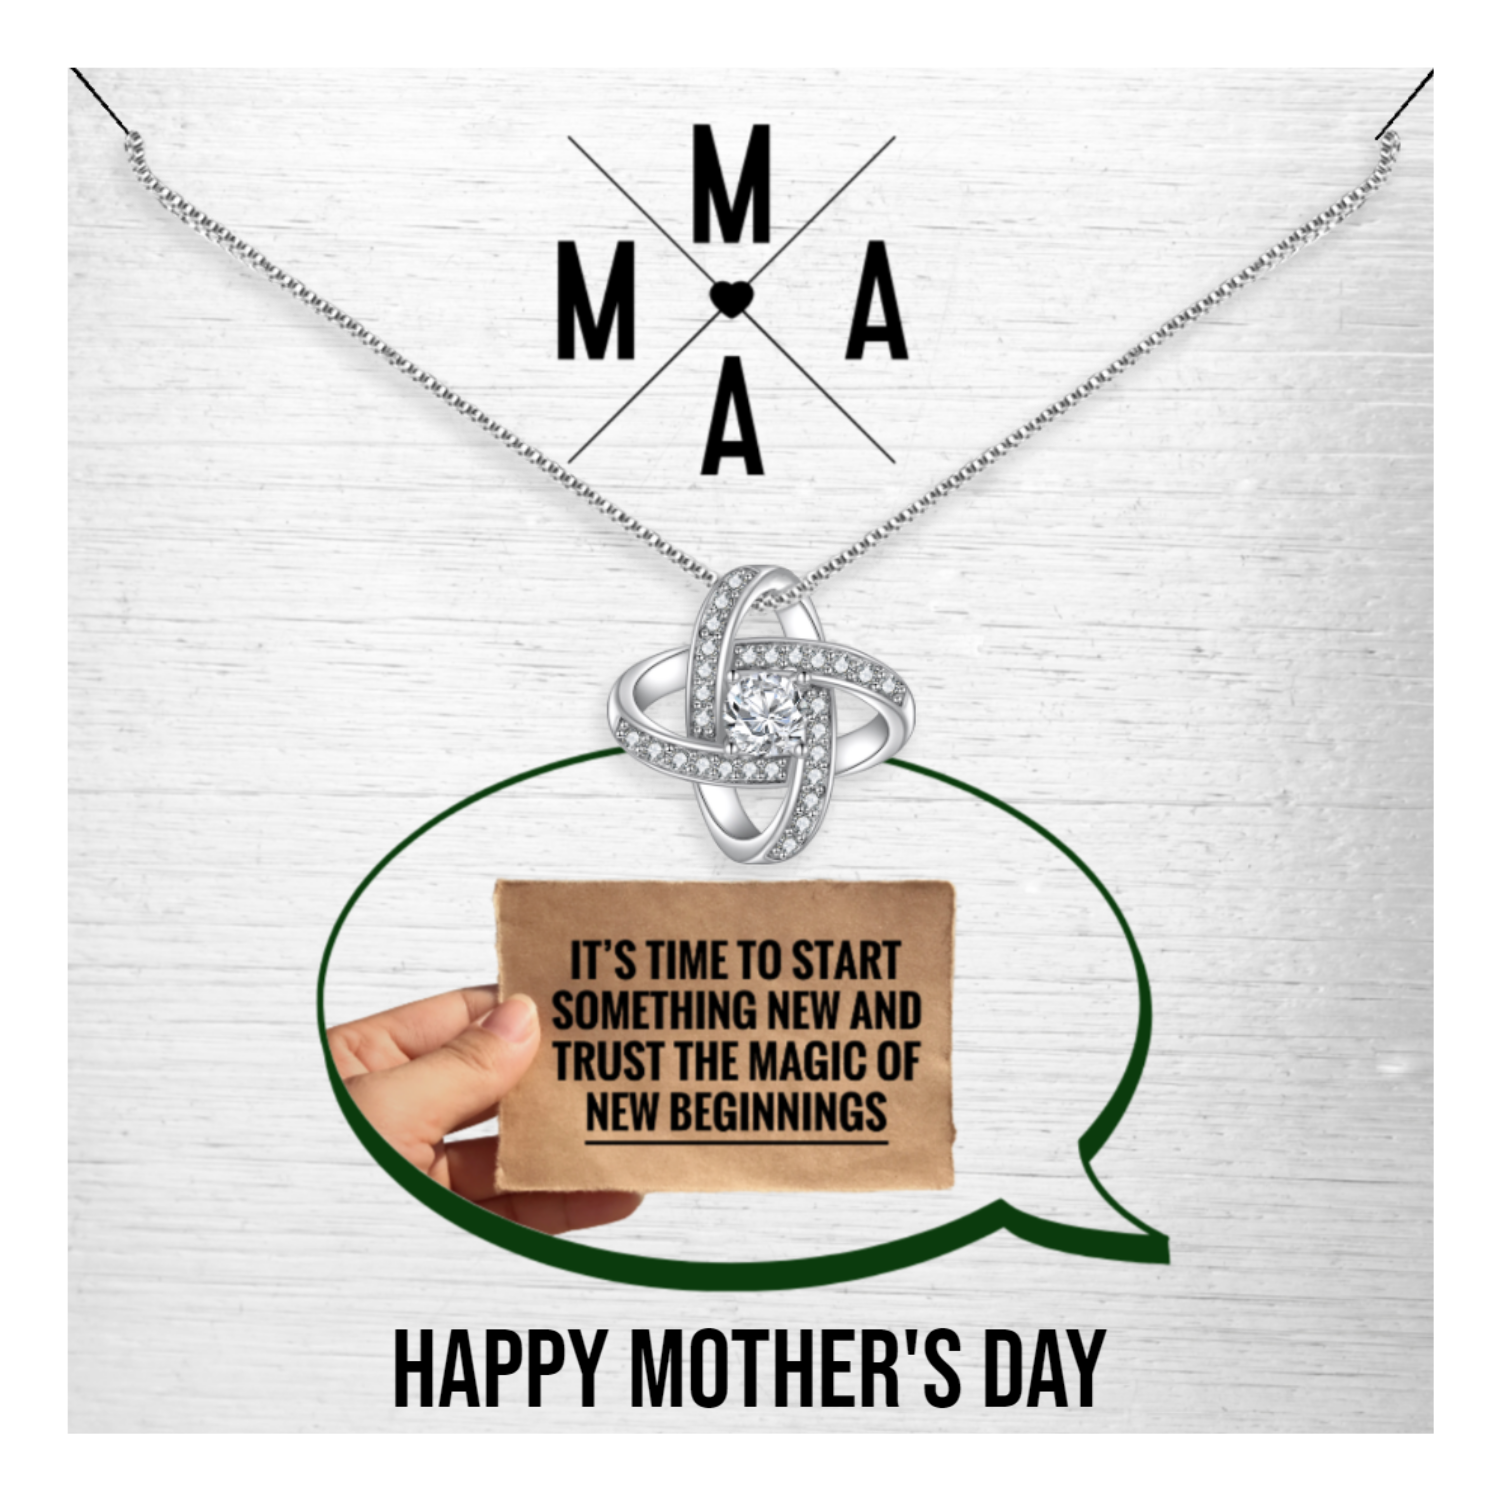 Personalized Necklaces + Message Cards - Mother's Enduring Love Knot Necklace - New Beginnings 